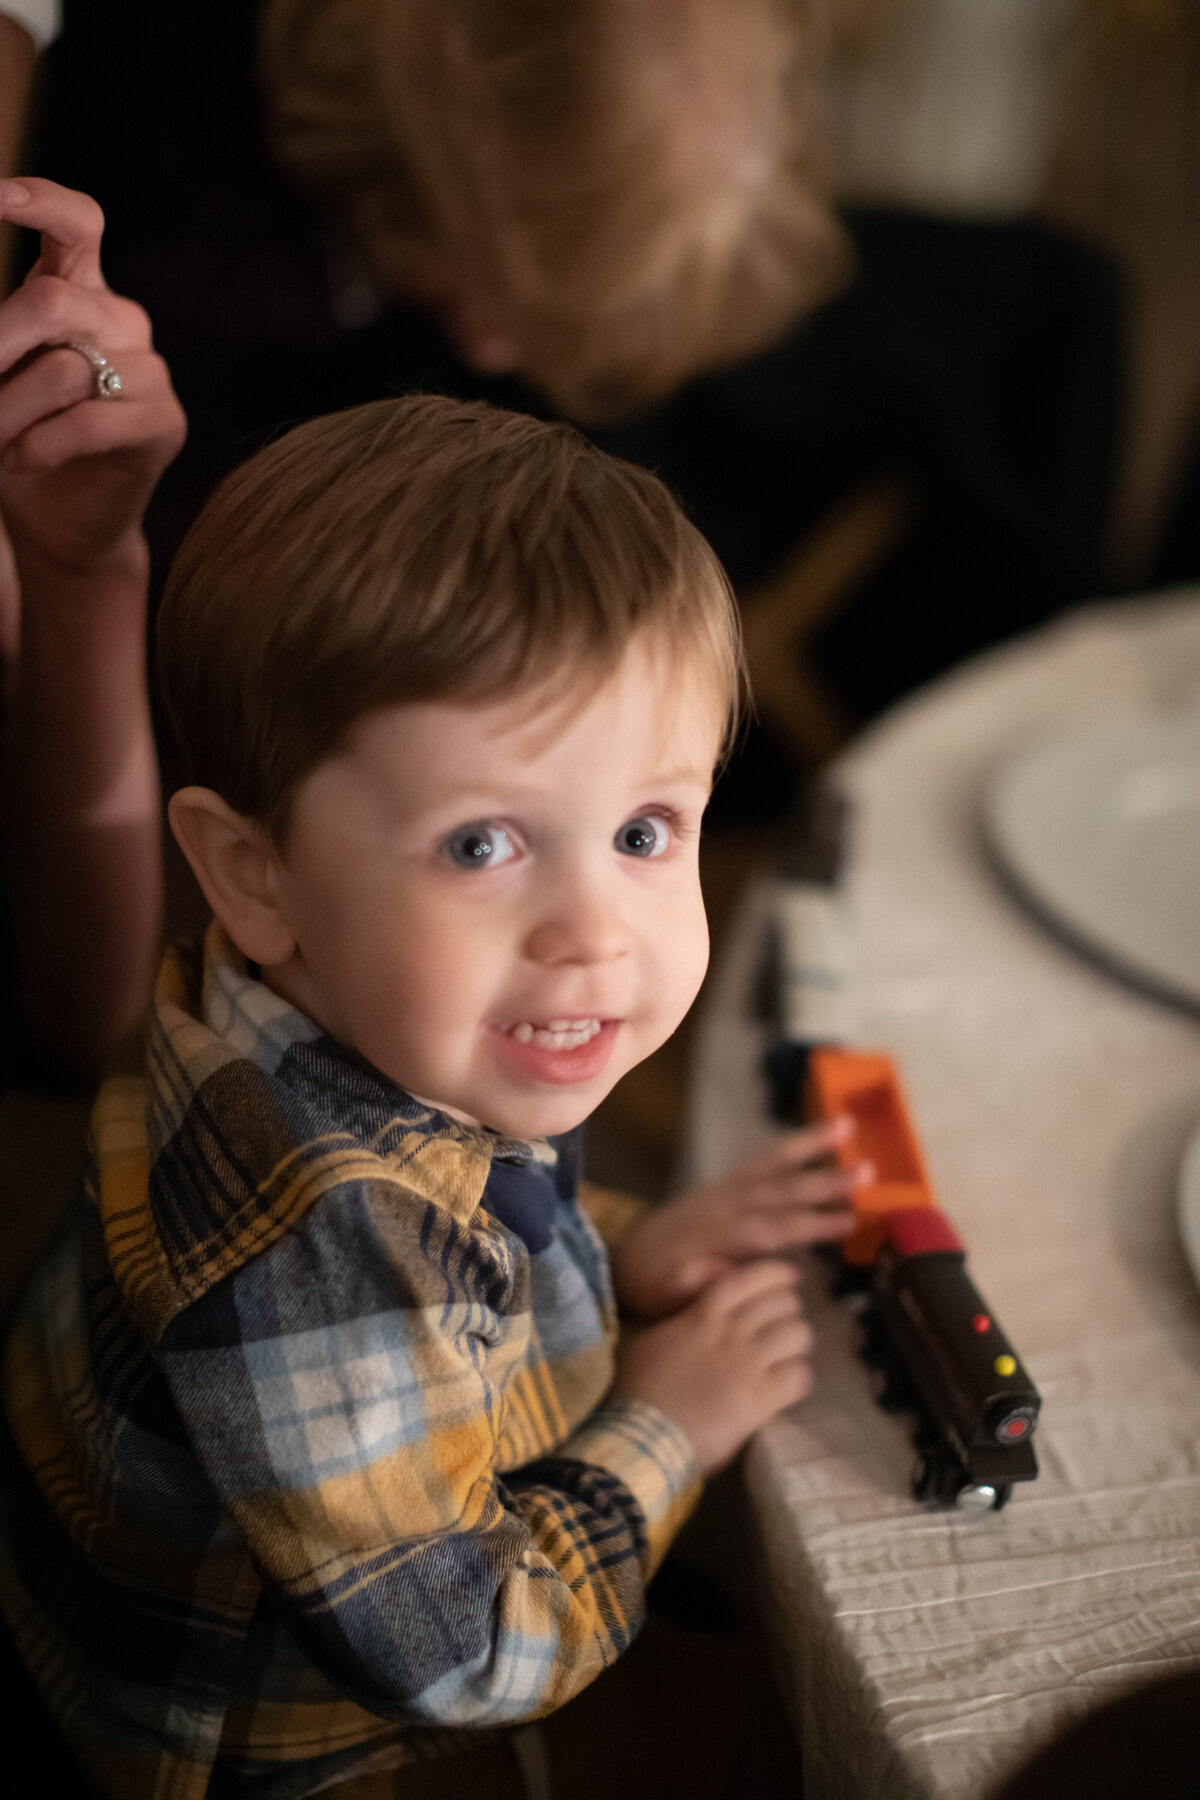 little boy plays with trains during wedding reception